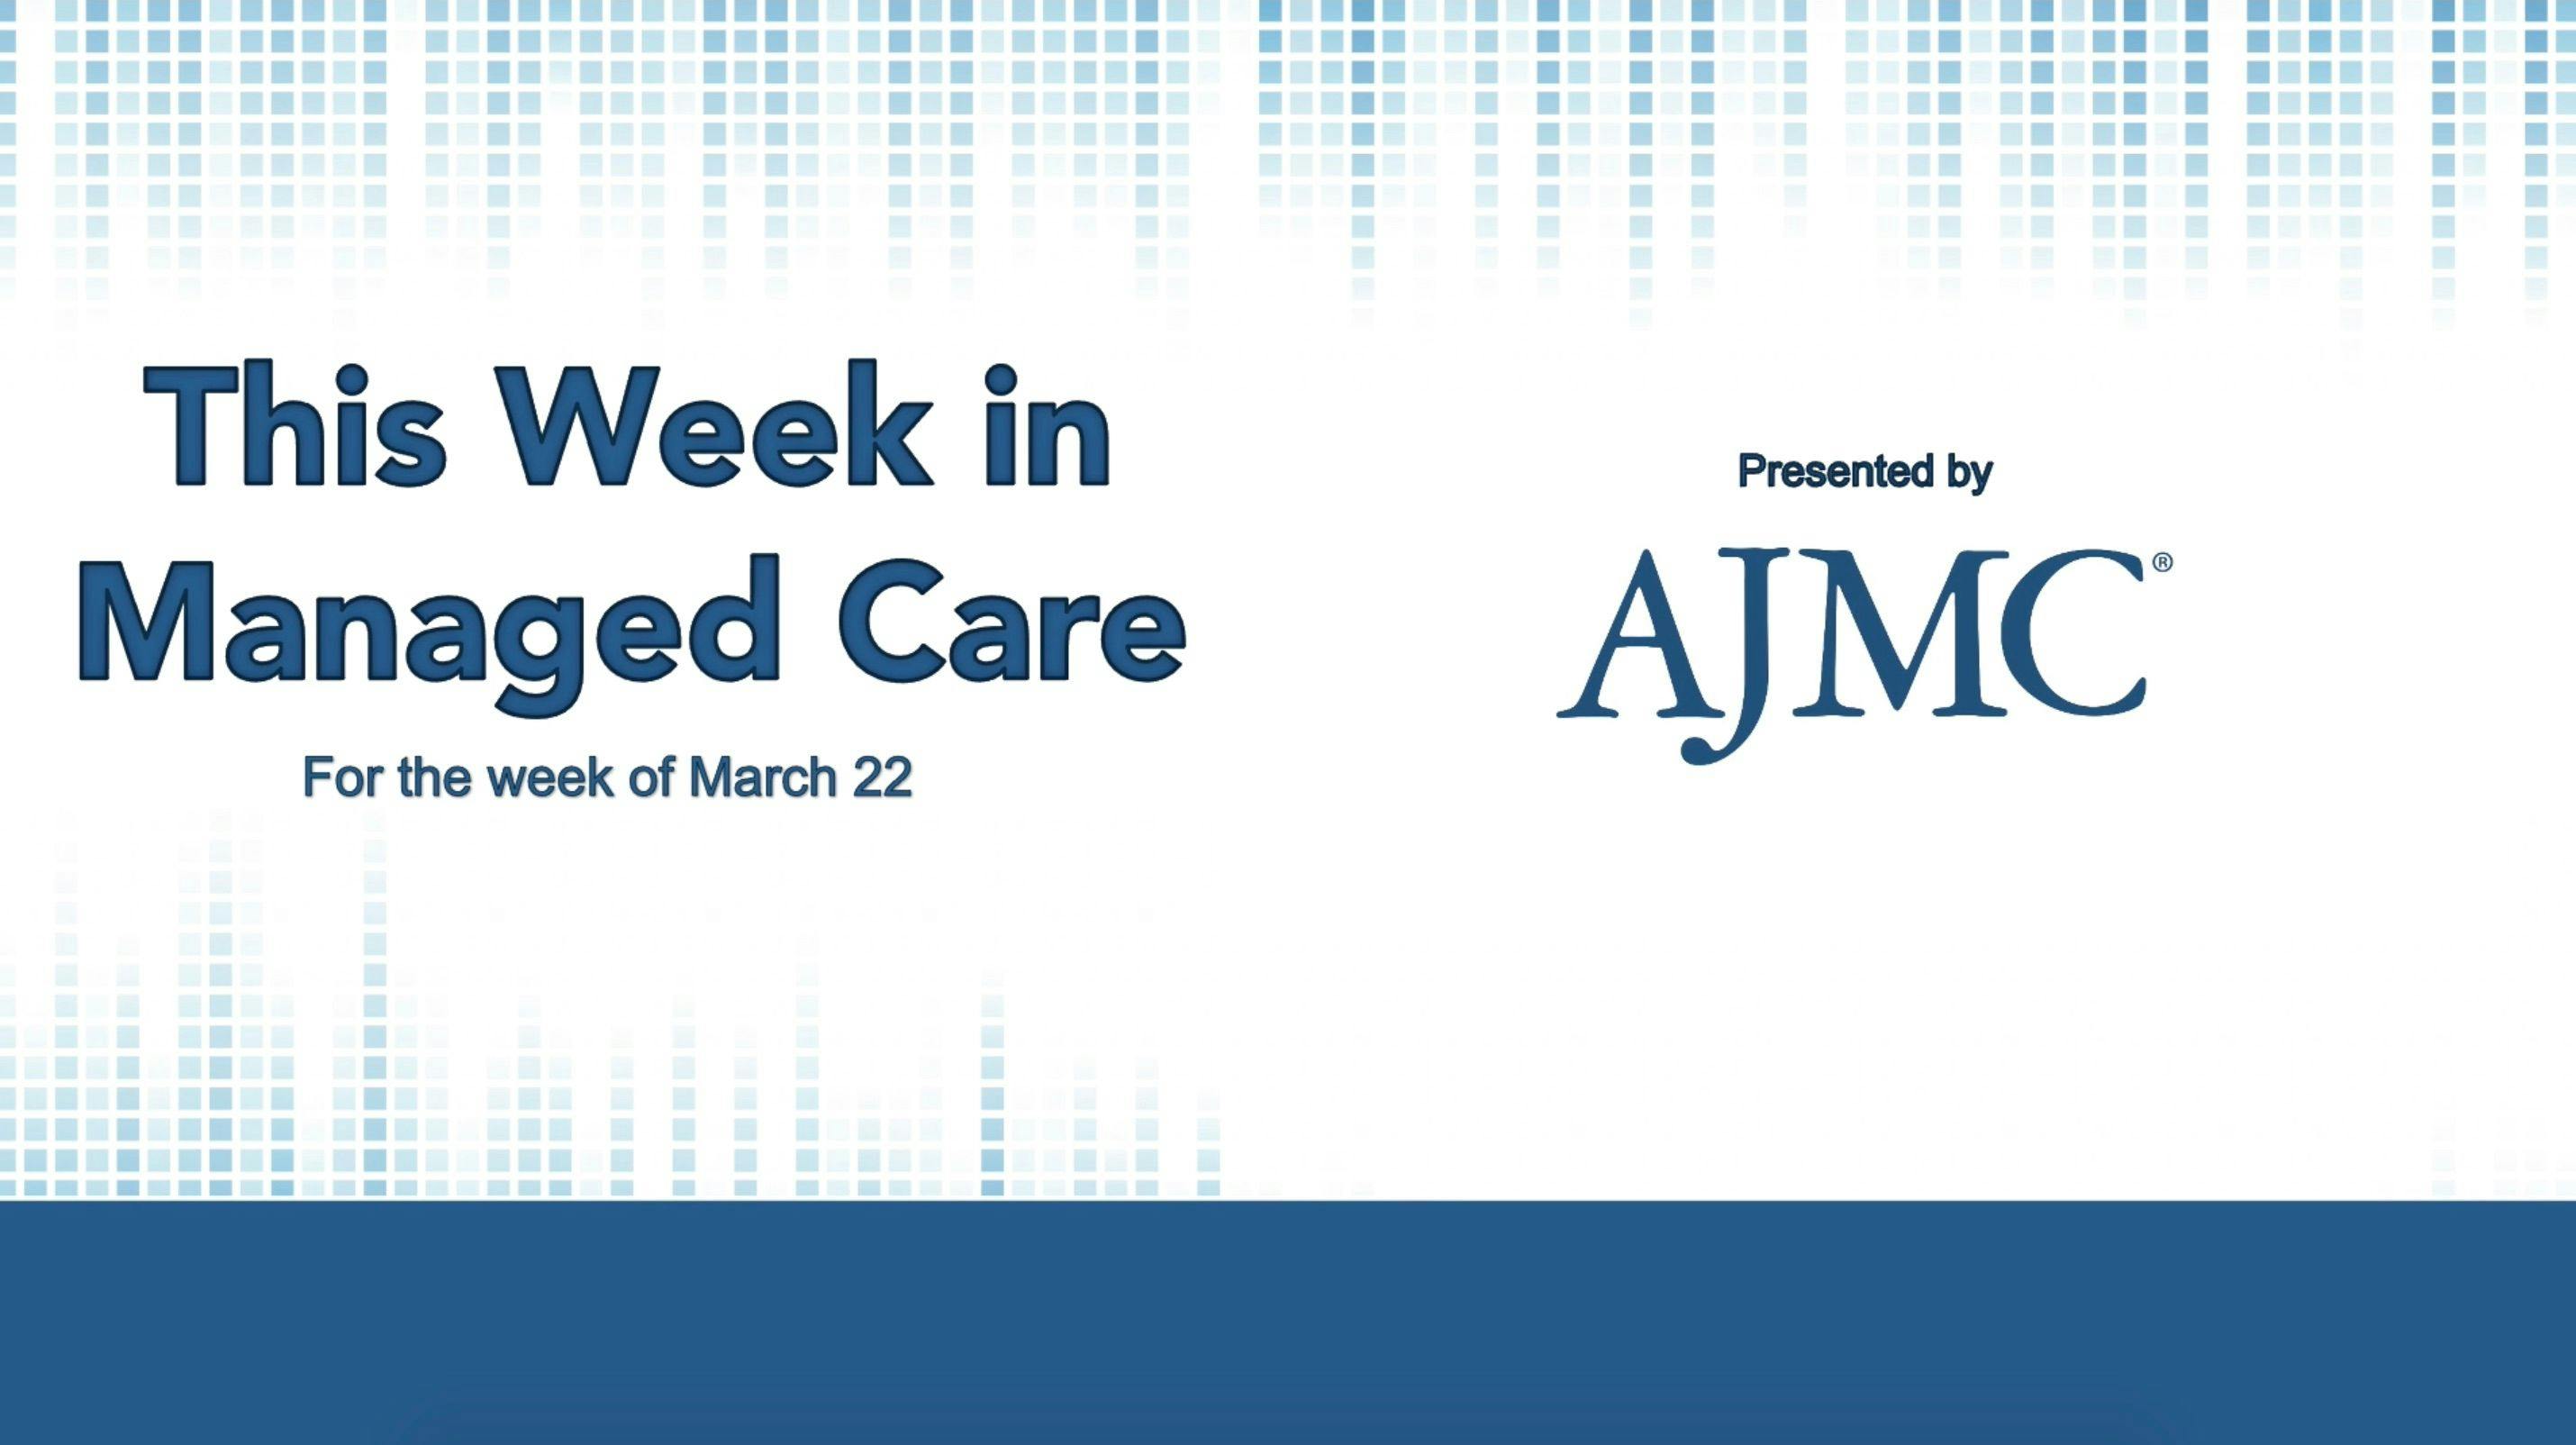 This Week in Managed Care: March 26, 2021